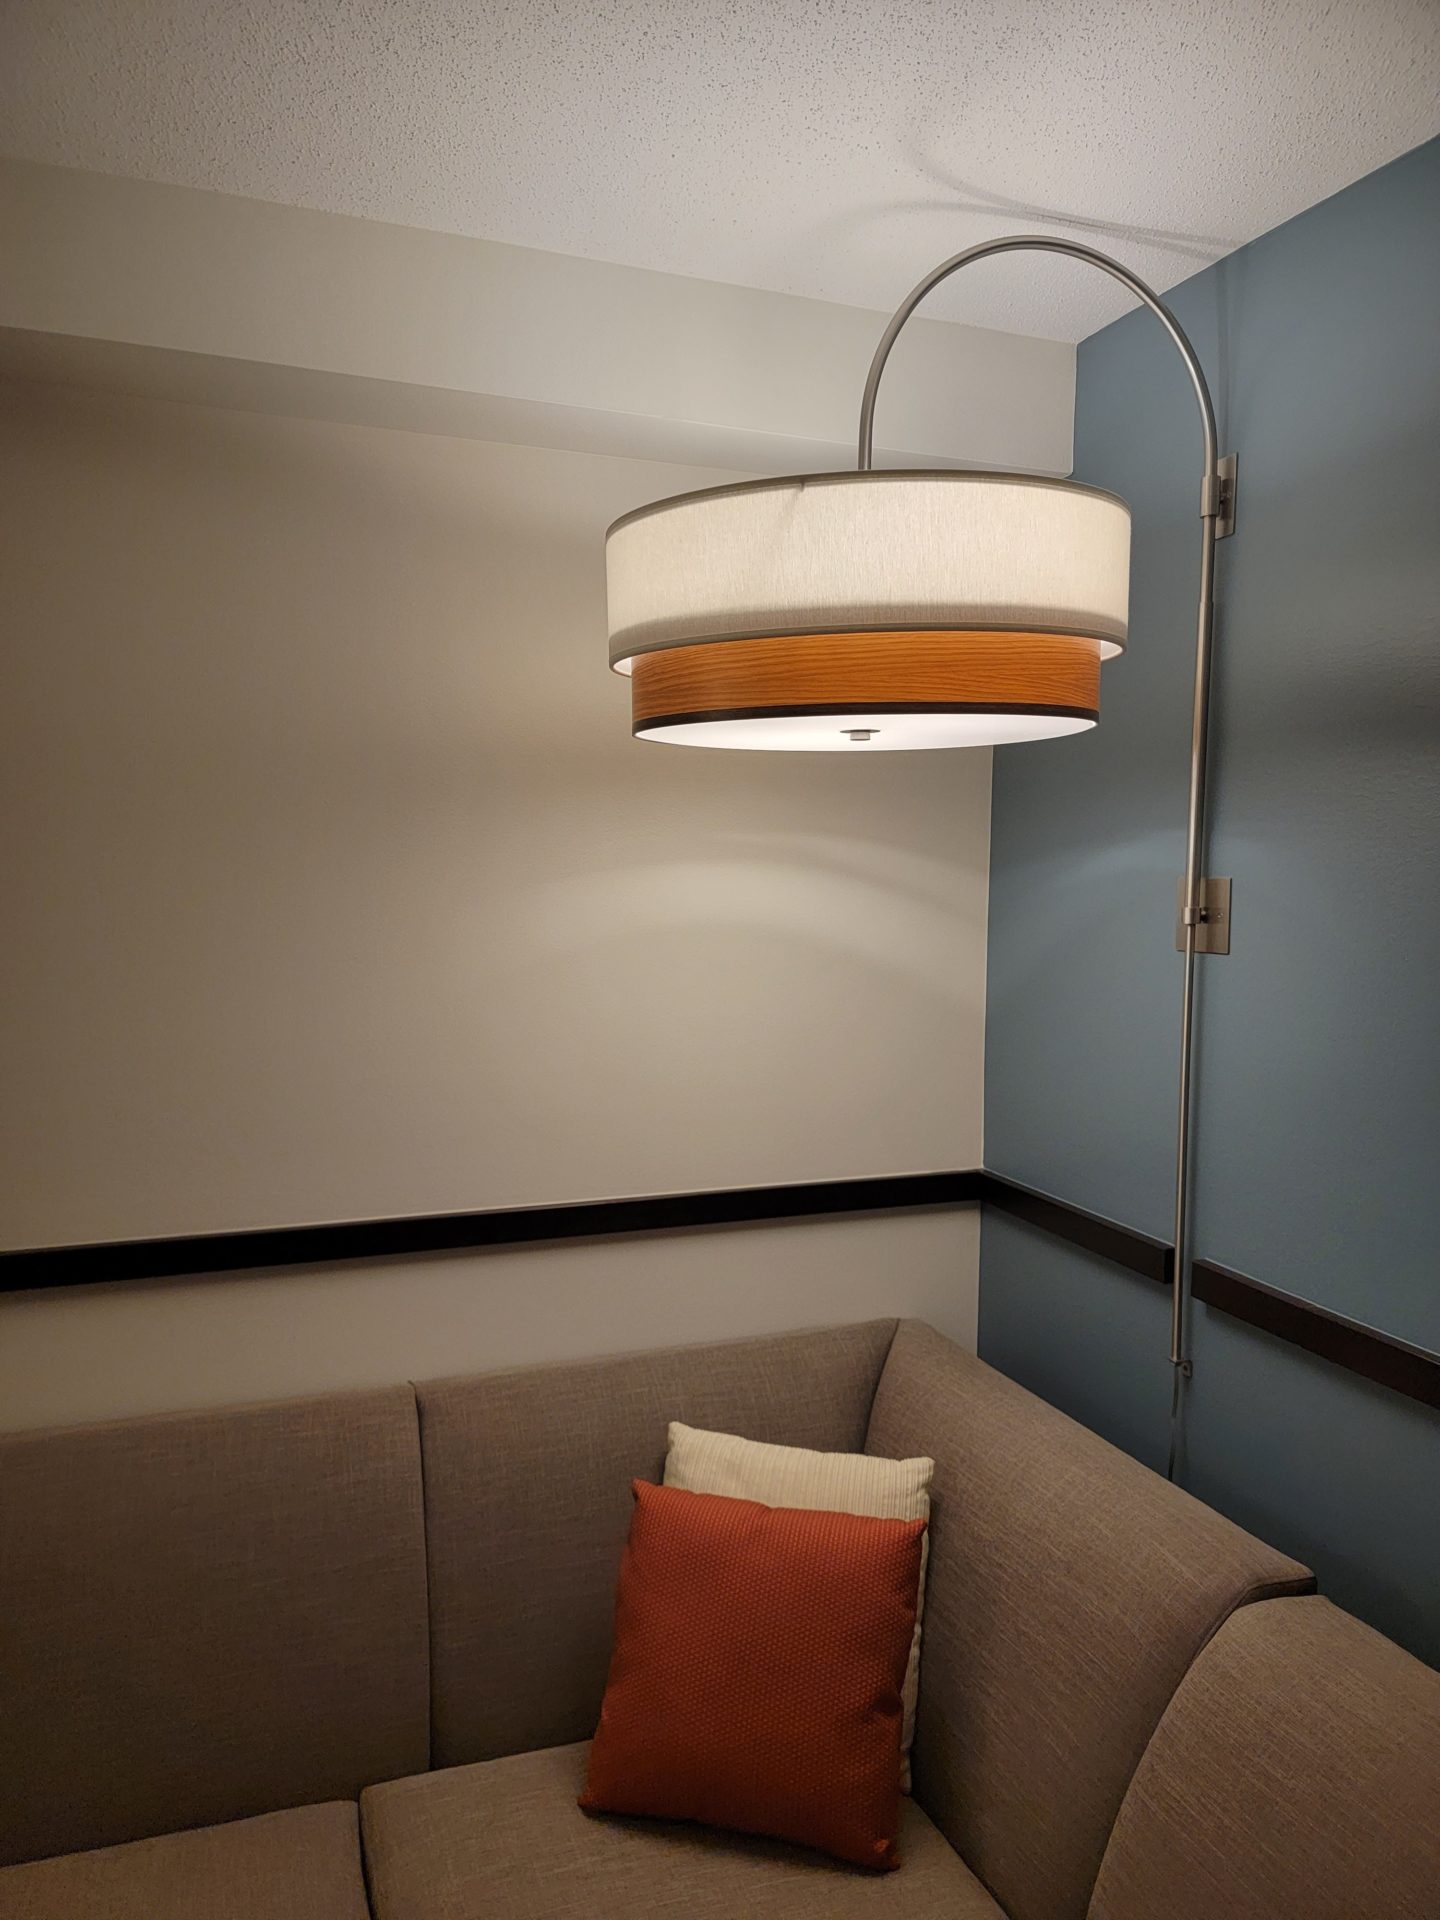 a lamp and pillow in a corner of a room